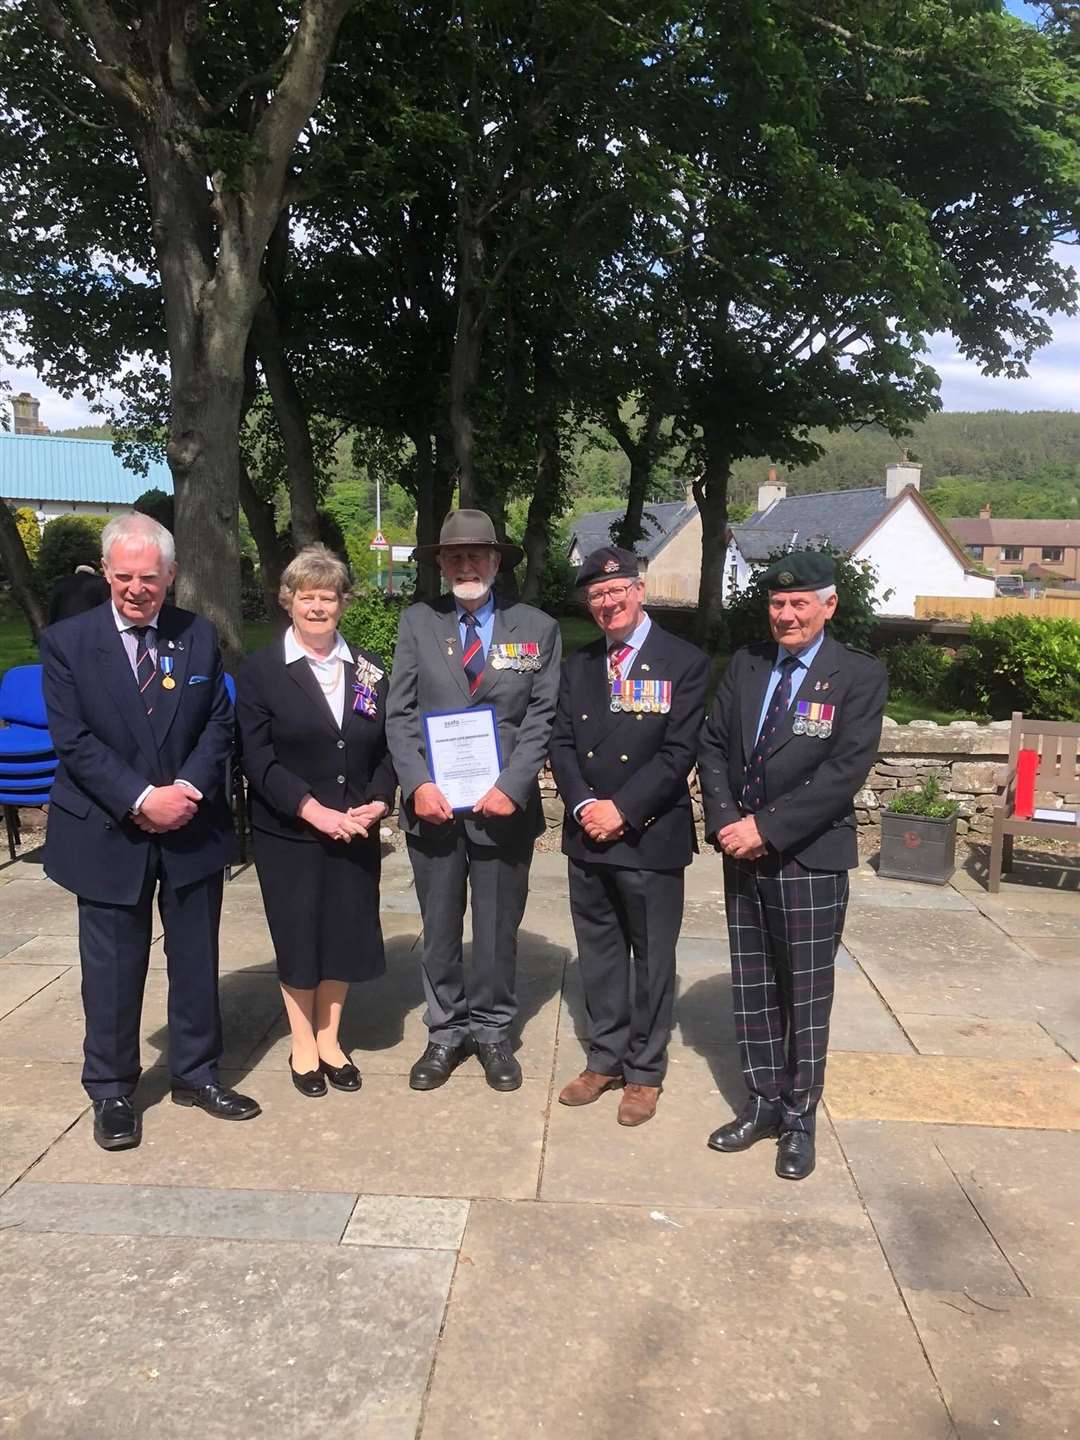 Jonathan Brett Young (centre) with, from left, William Sutherland, Dr Monica Main, Major General Patrick Marriott and Alisdair Miller.